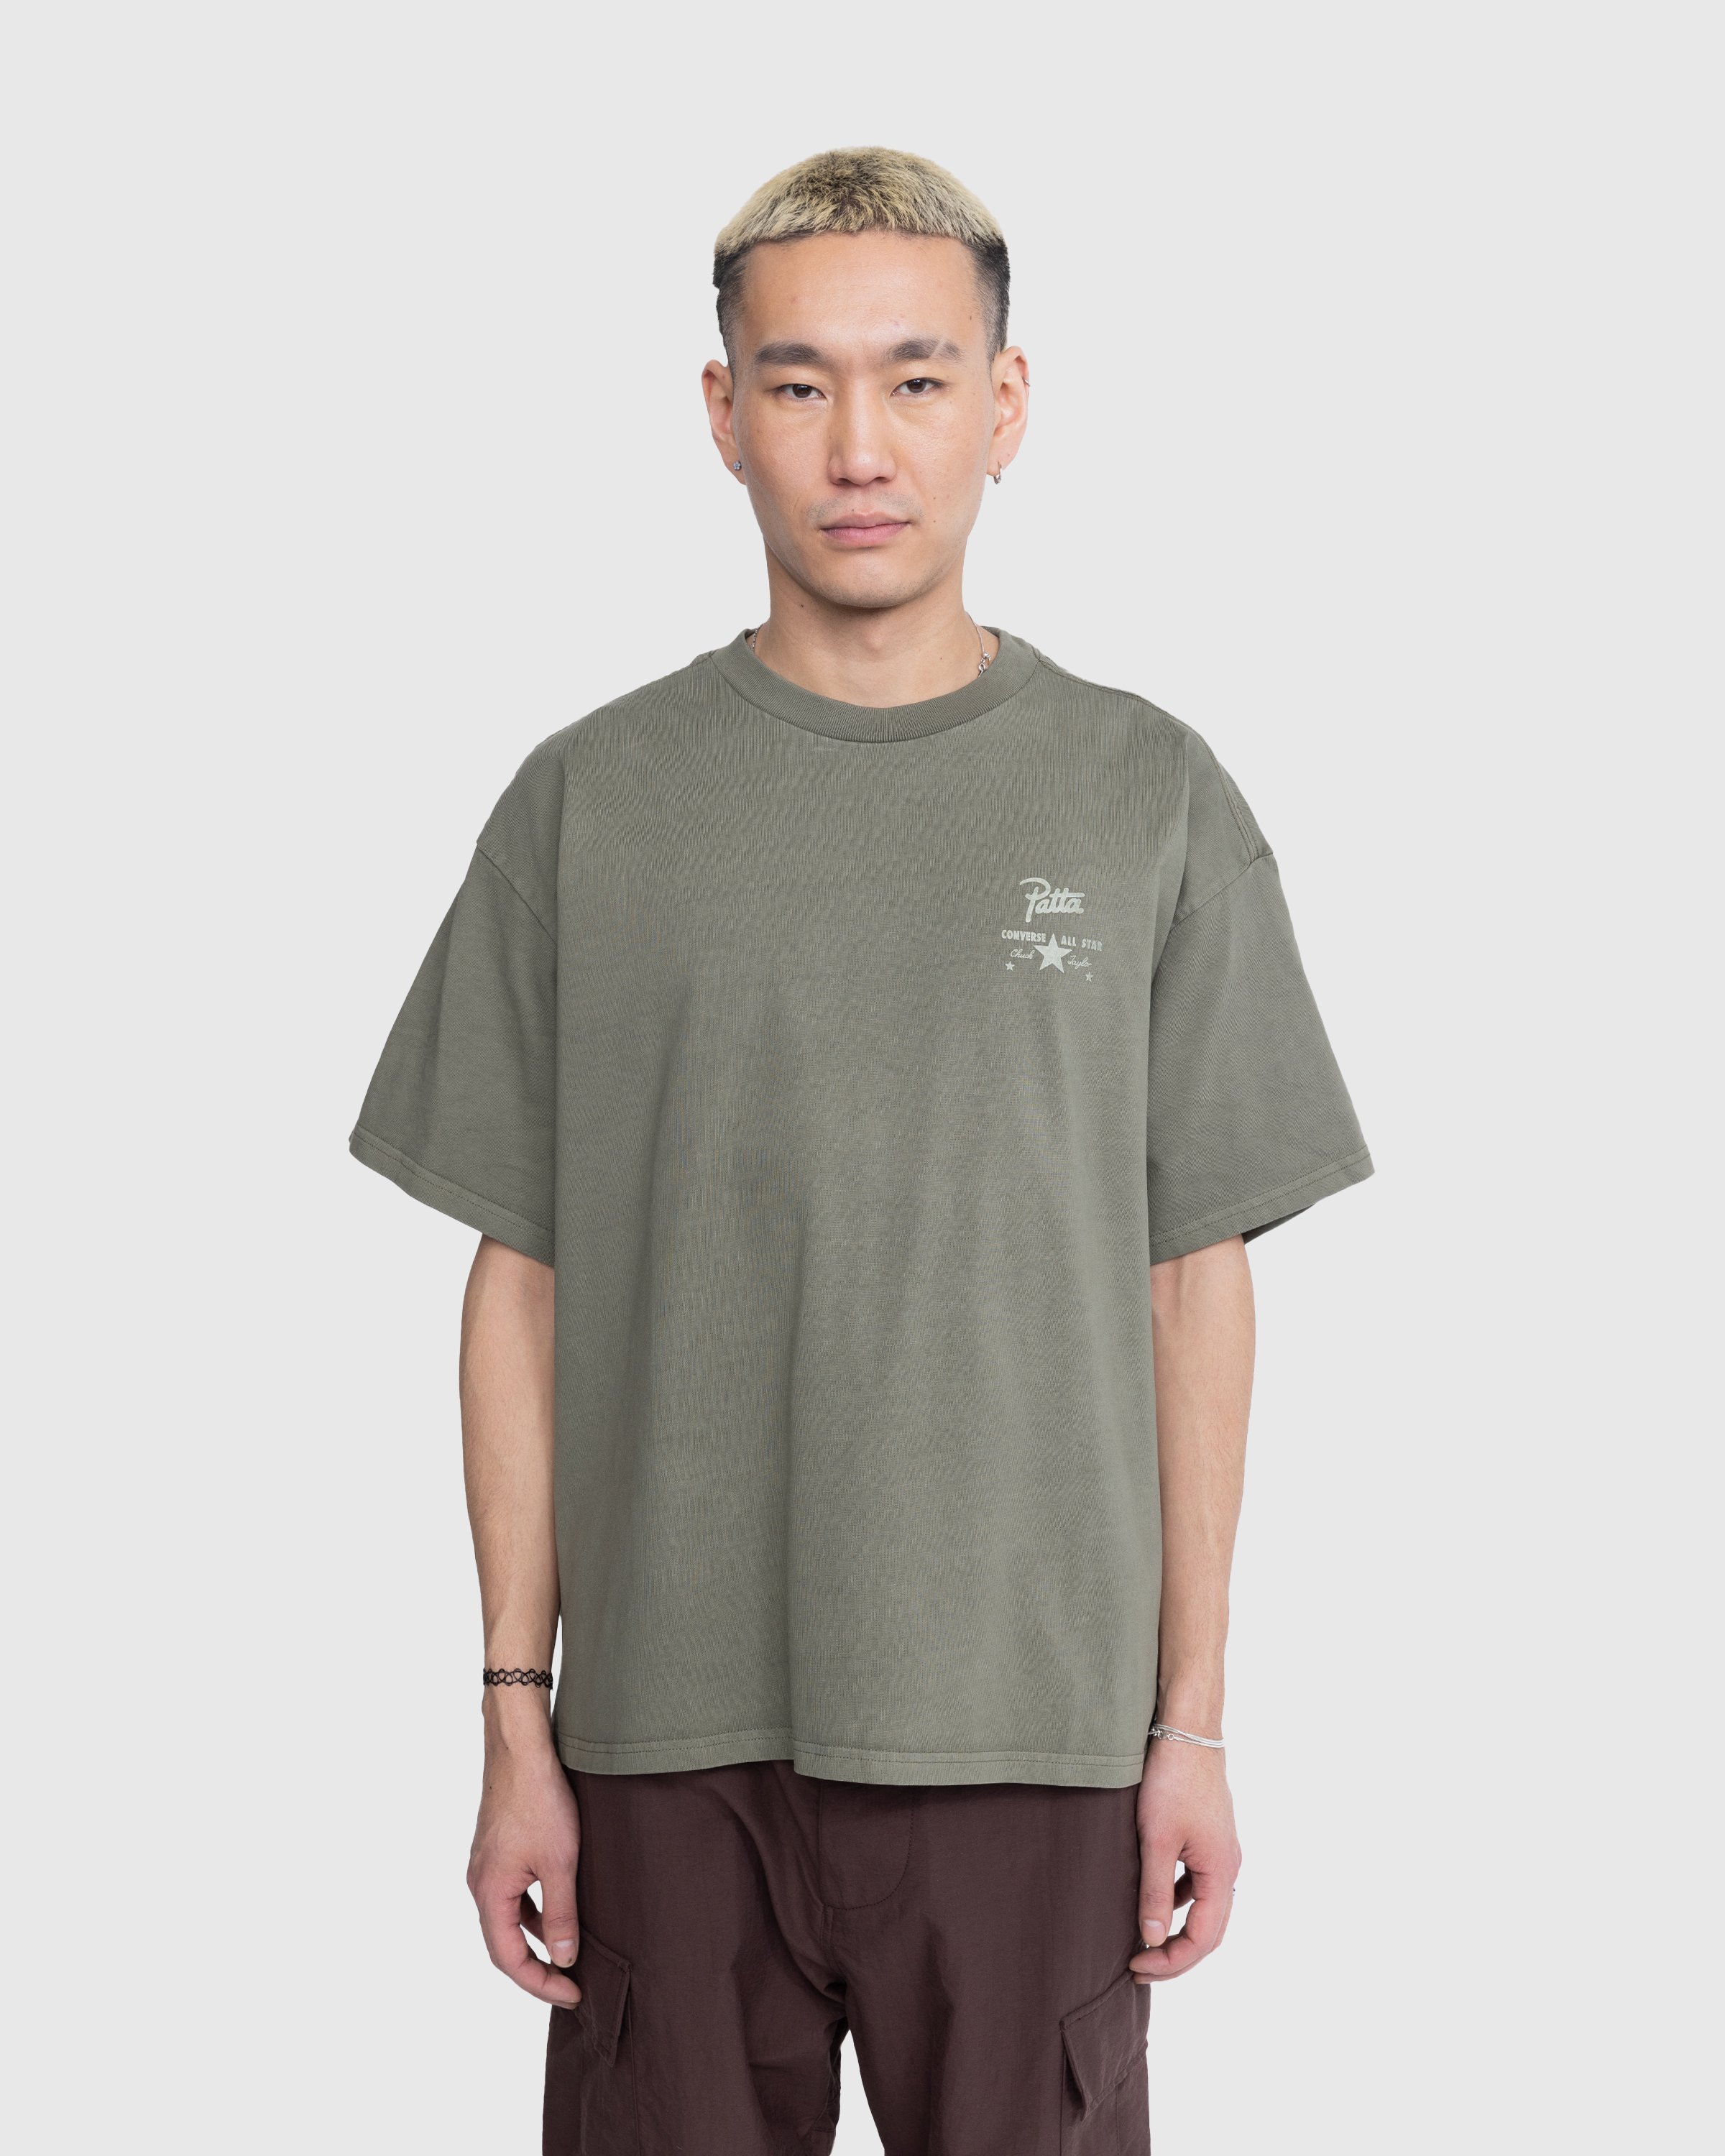 Patta x Converse - Tee Burnt Olive - Clothing - Brown - Image 3